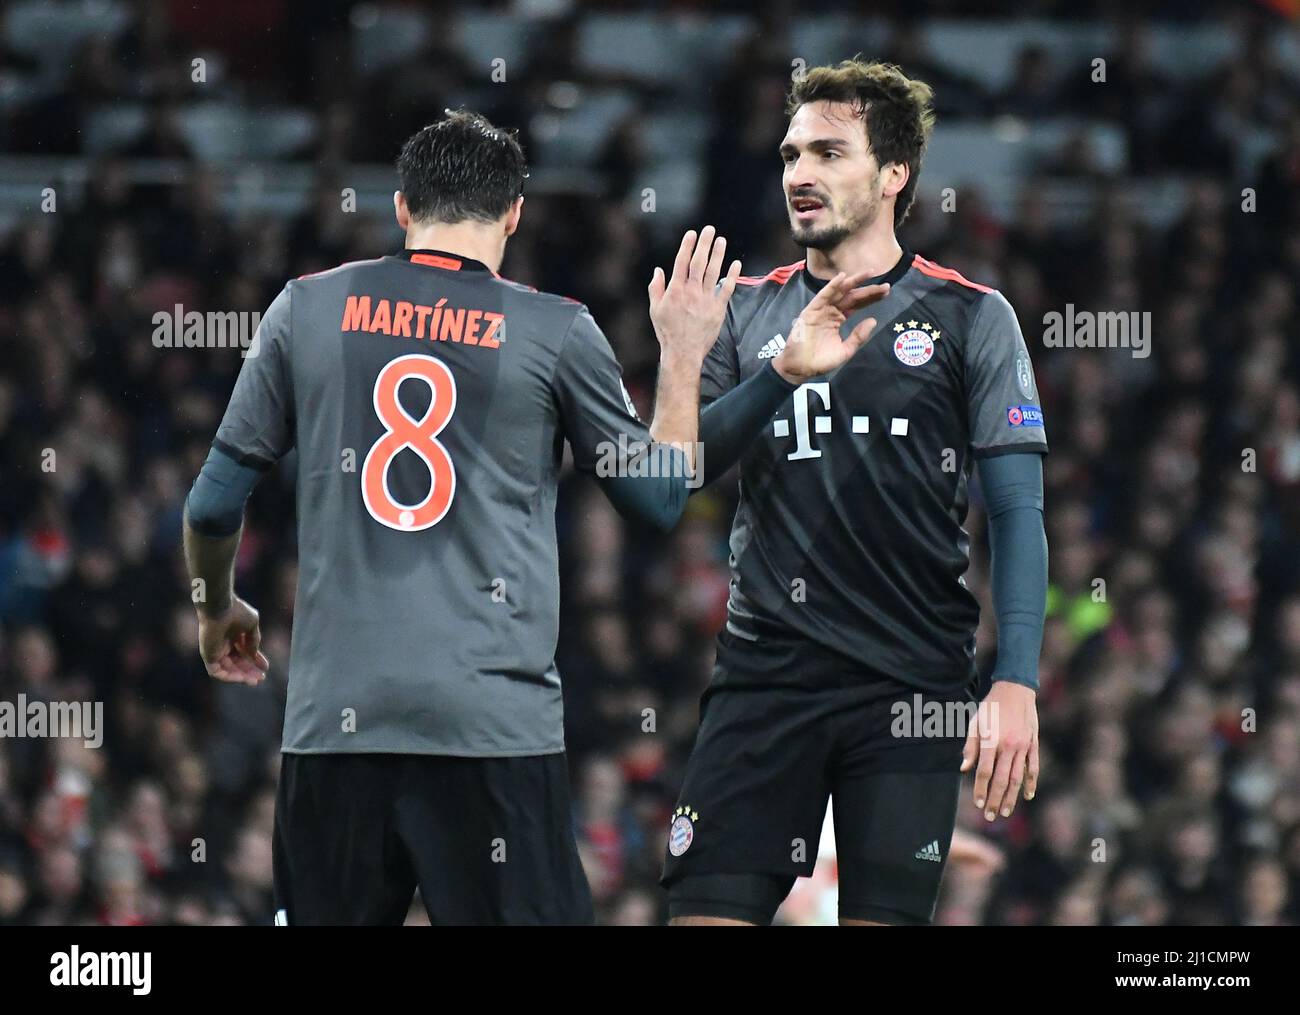 LONDON, ENGLAND - MARCH 7, 2017: Javi Martinez (L) and Mats Hummels (R) of Bayern pictured during the second leg of the UEFA Champions League Round of 16 game between Arsenal FC and Bayern Munchen at Emirates Stadium. Copyright: Cosmin Iftode/Picstaff Stock Photo